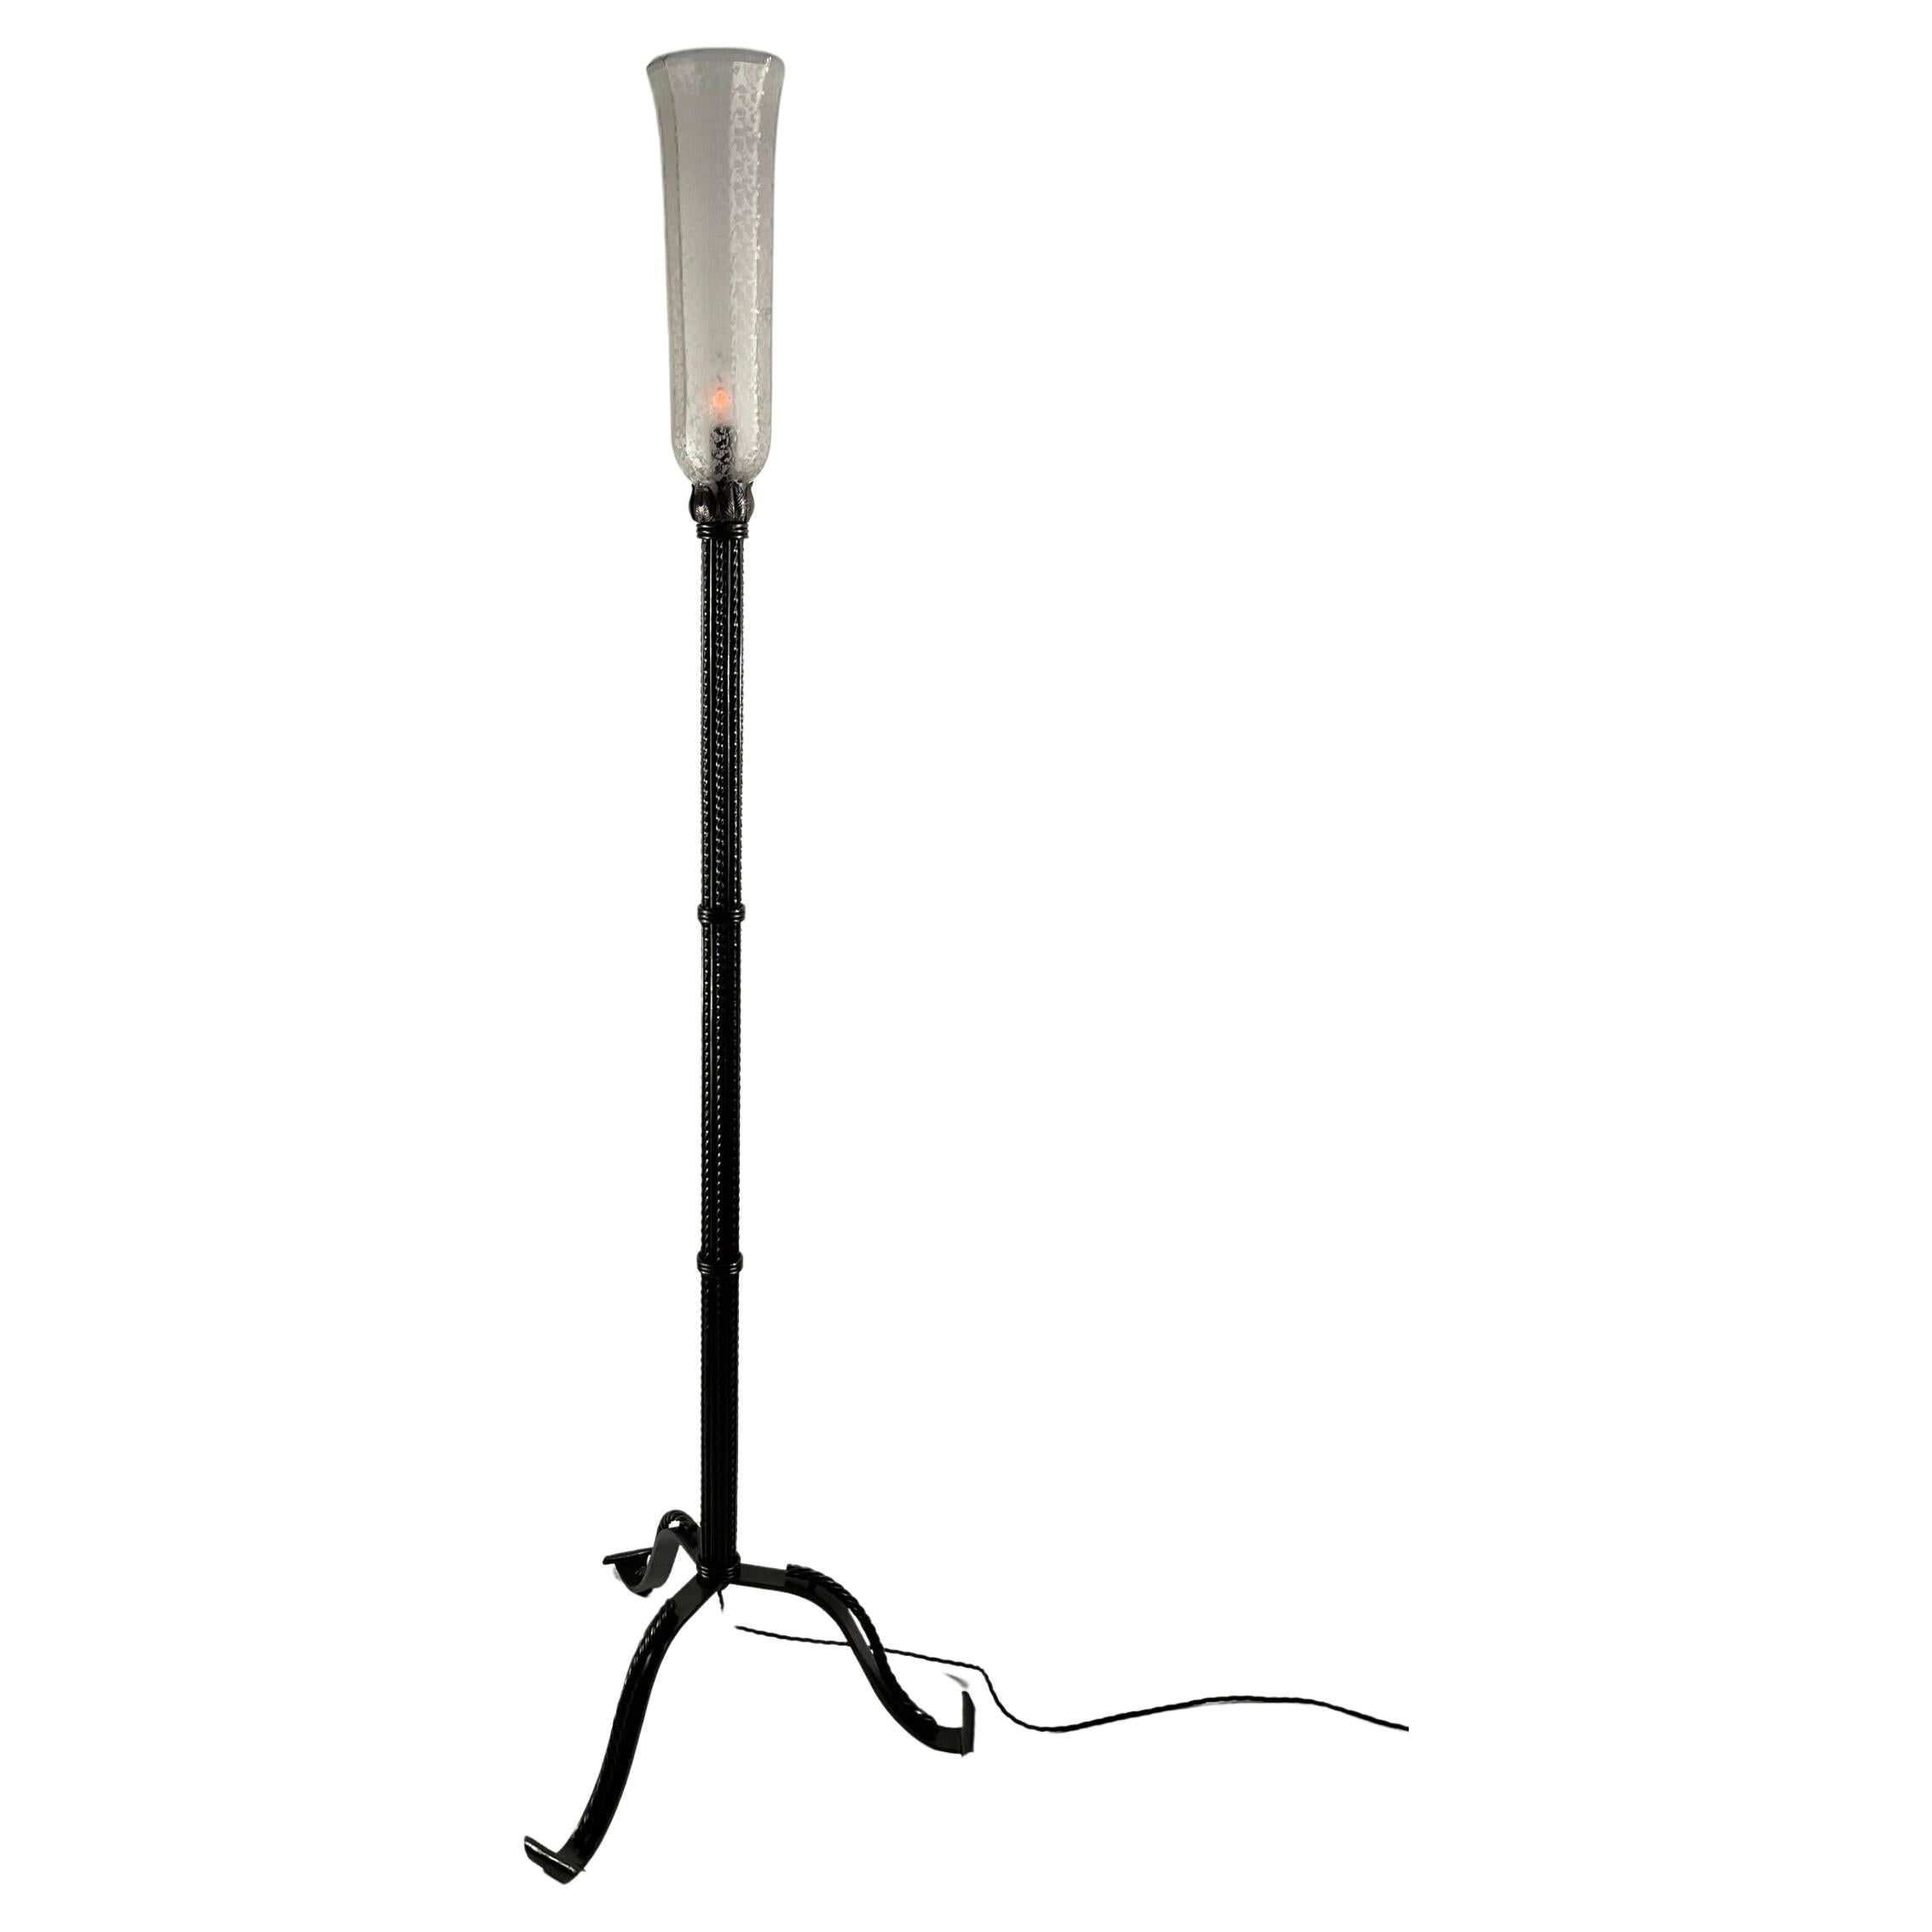 1920s French Art Deco Wrought Iron Floor Lamp with Frosted Glass Shade For Sale